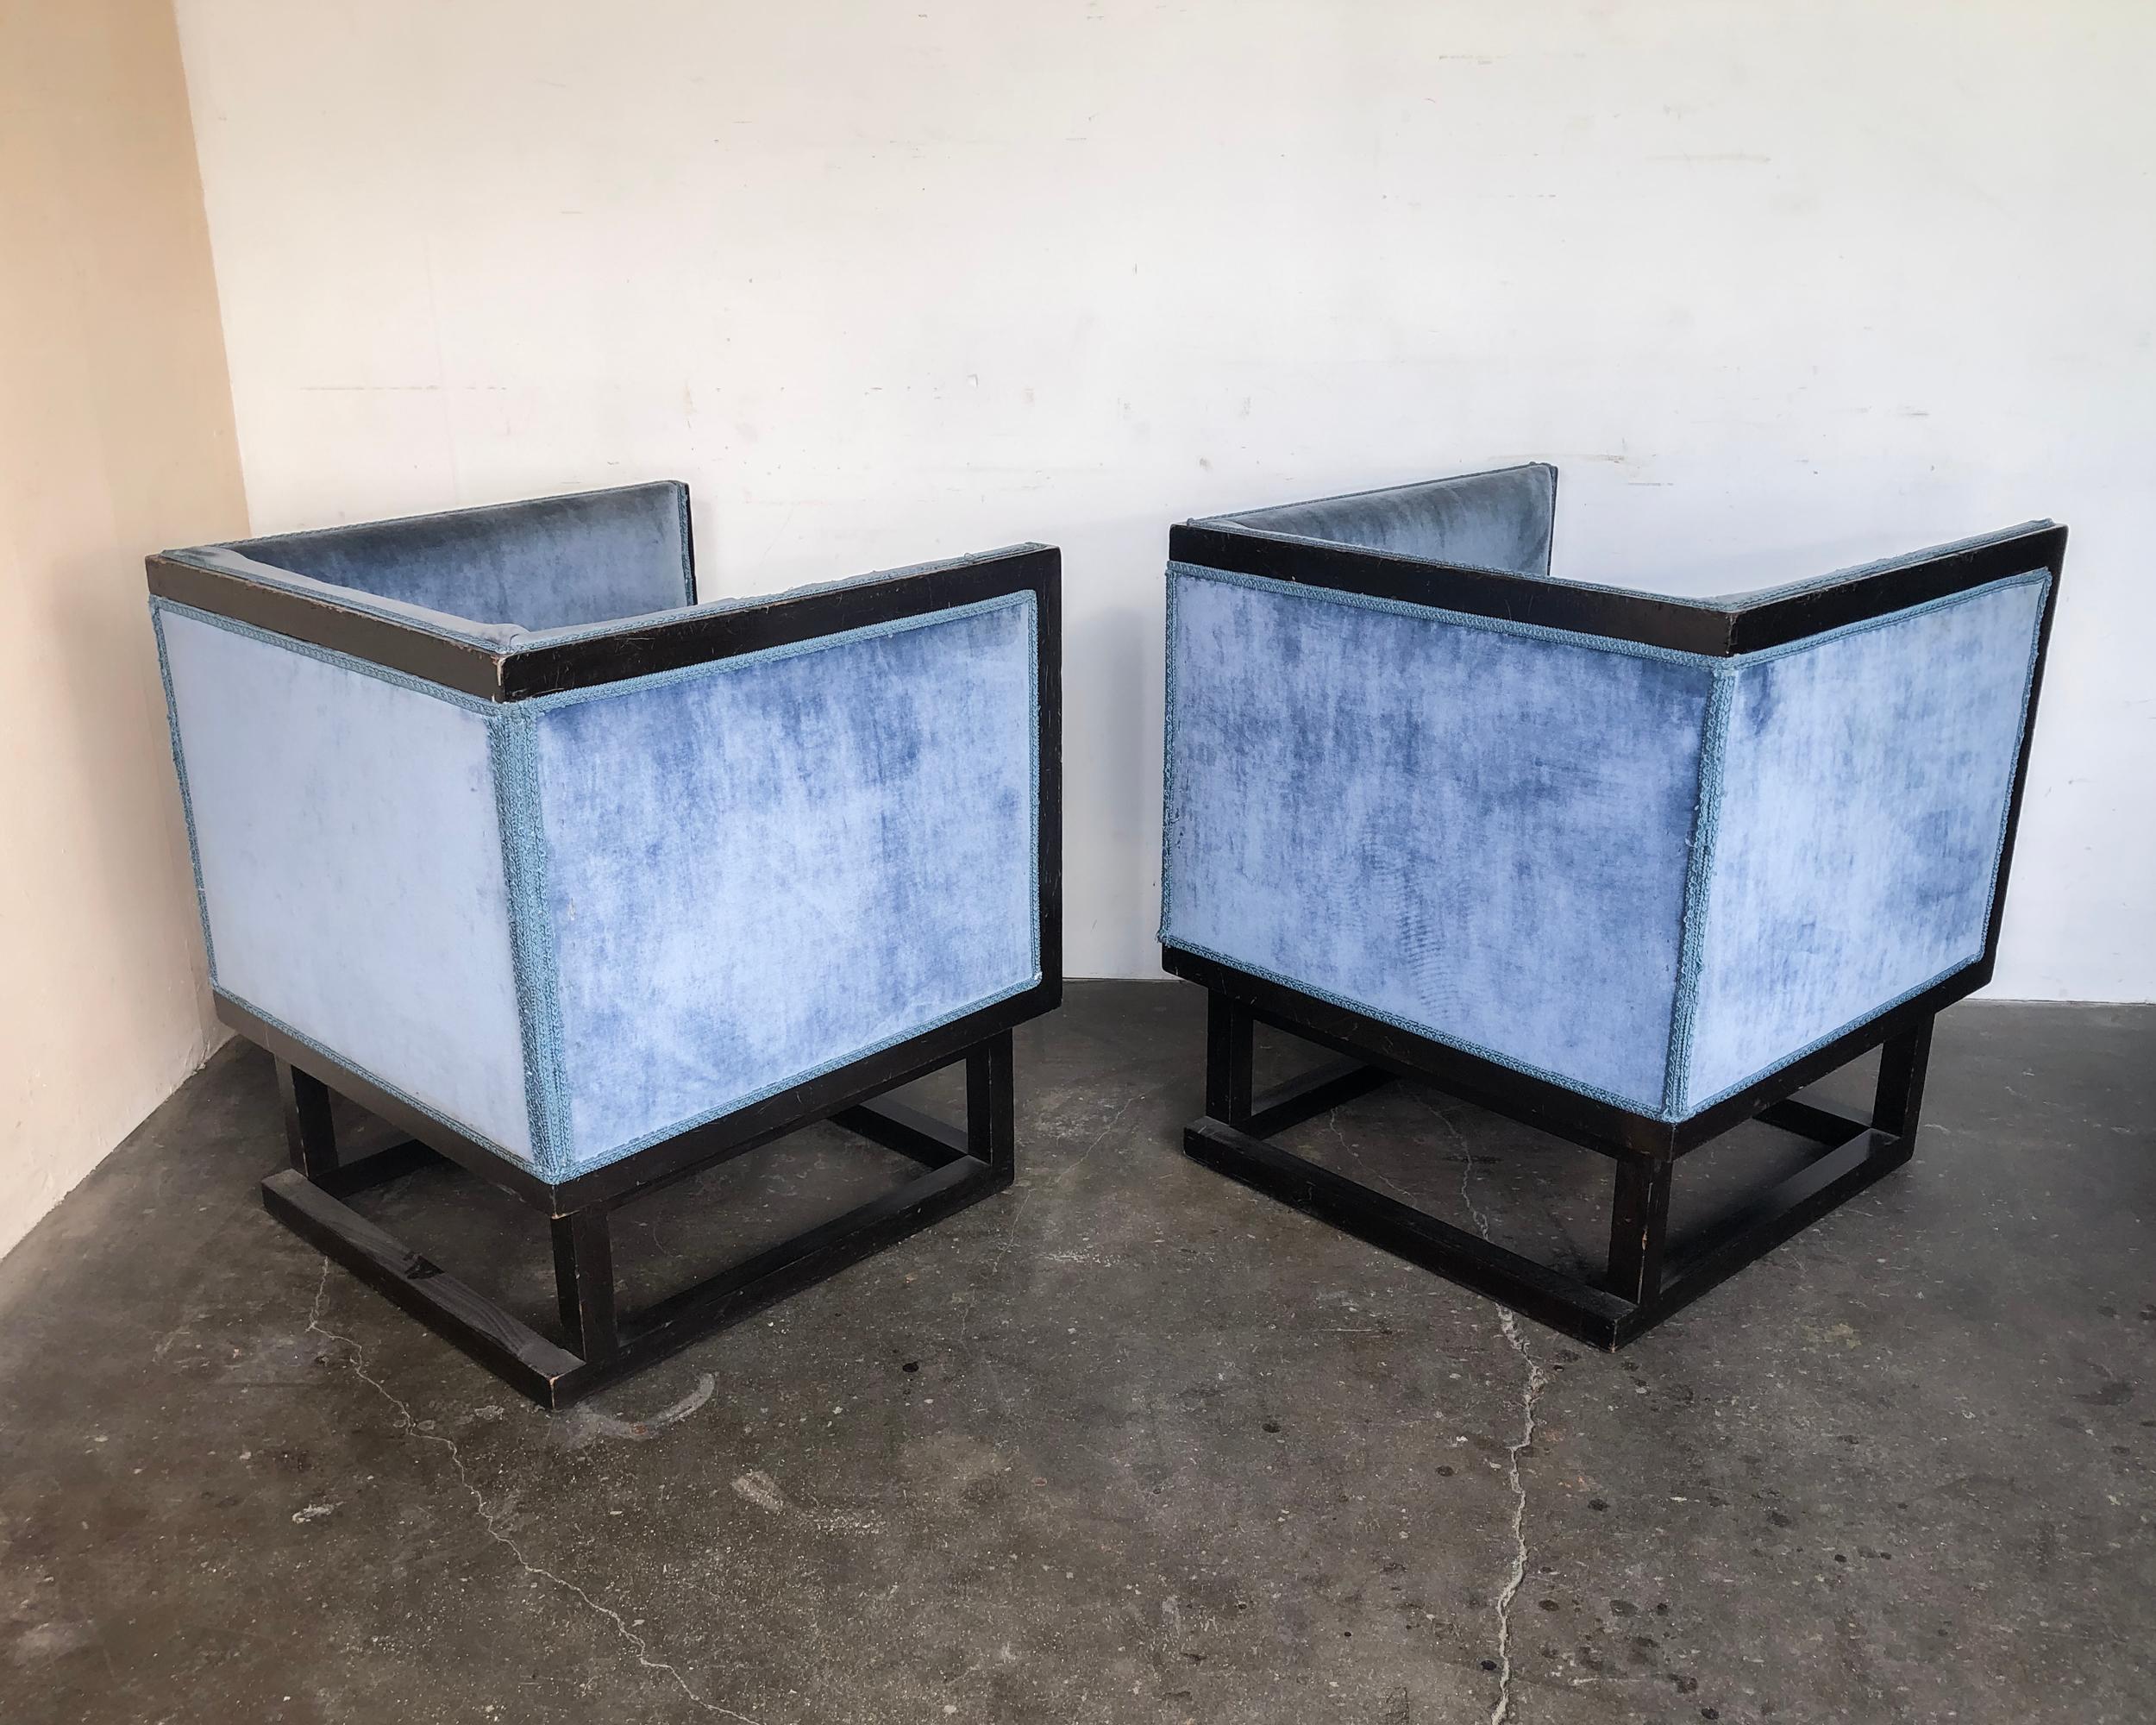 Pair of Rare Josef Hoffmann Cabinet Chairs by Wittmann Austria 1903 In Distressed Condition For Sale In Hawthorne, CA